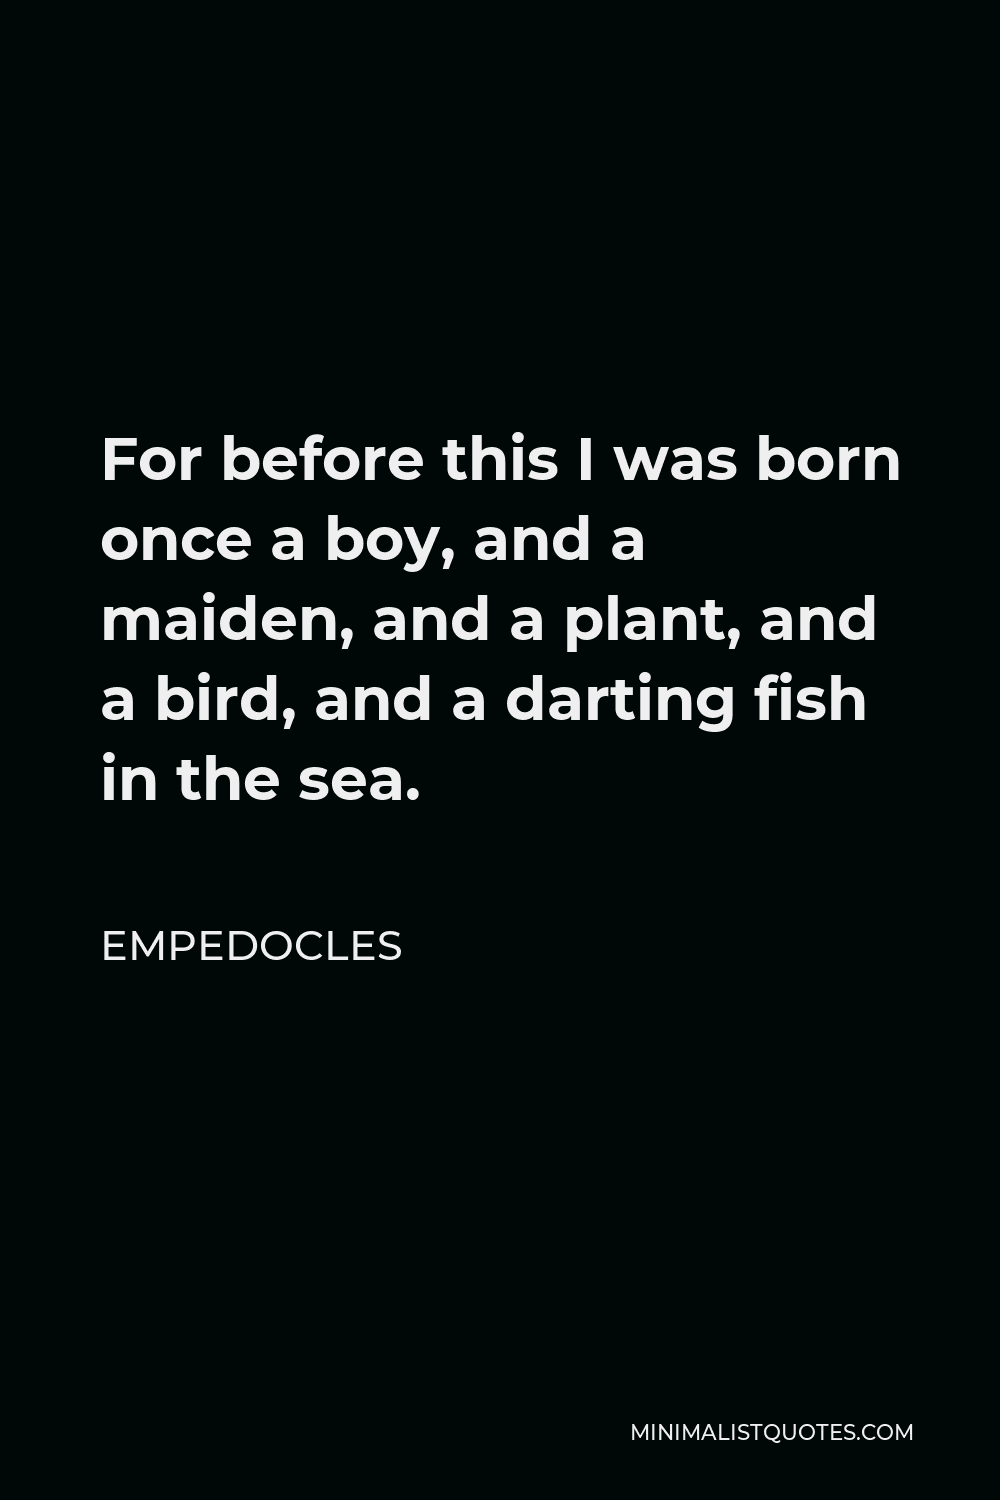 Empedocles Quote - For before this I was born once a boy, and a maiden, and a plant, and a bird, and a darting fish in the sea.